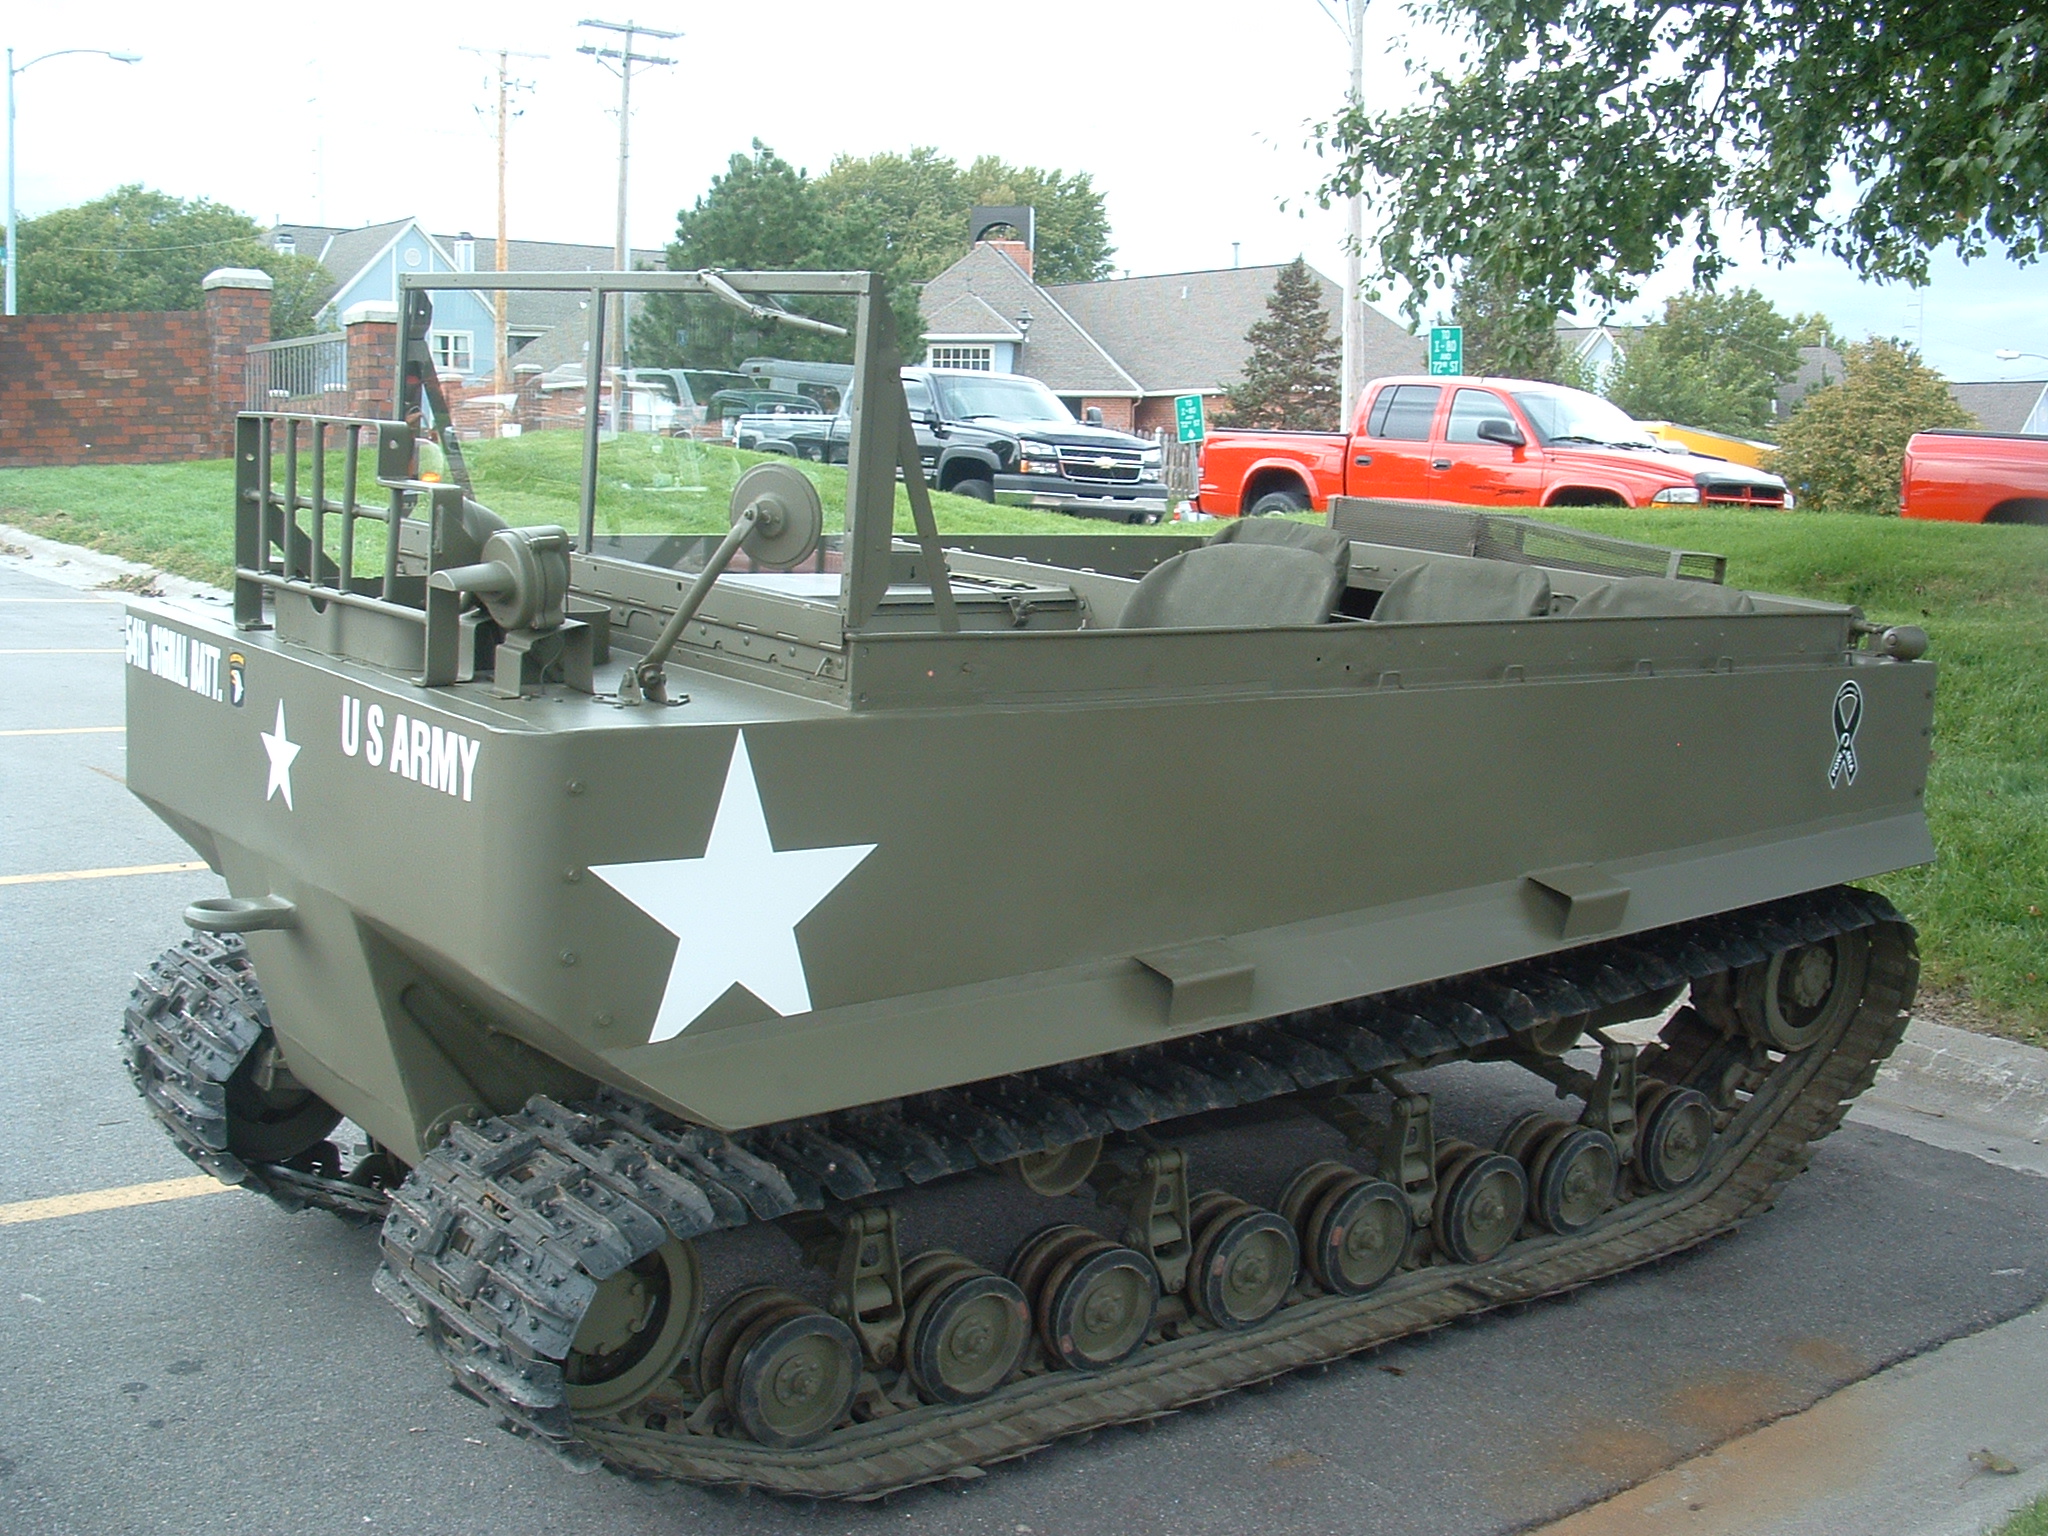 Studebaker M29 Weasel Photo Gallery: Photo #07 out of 12, Image ...